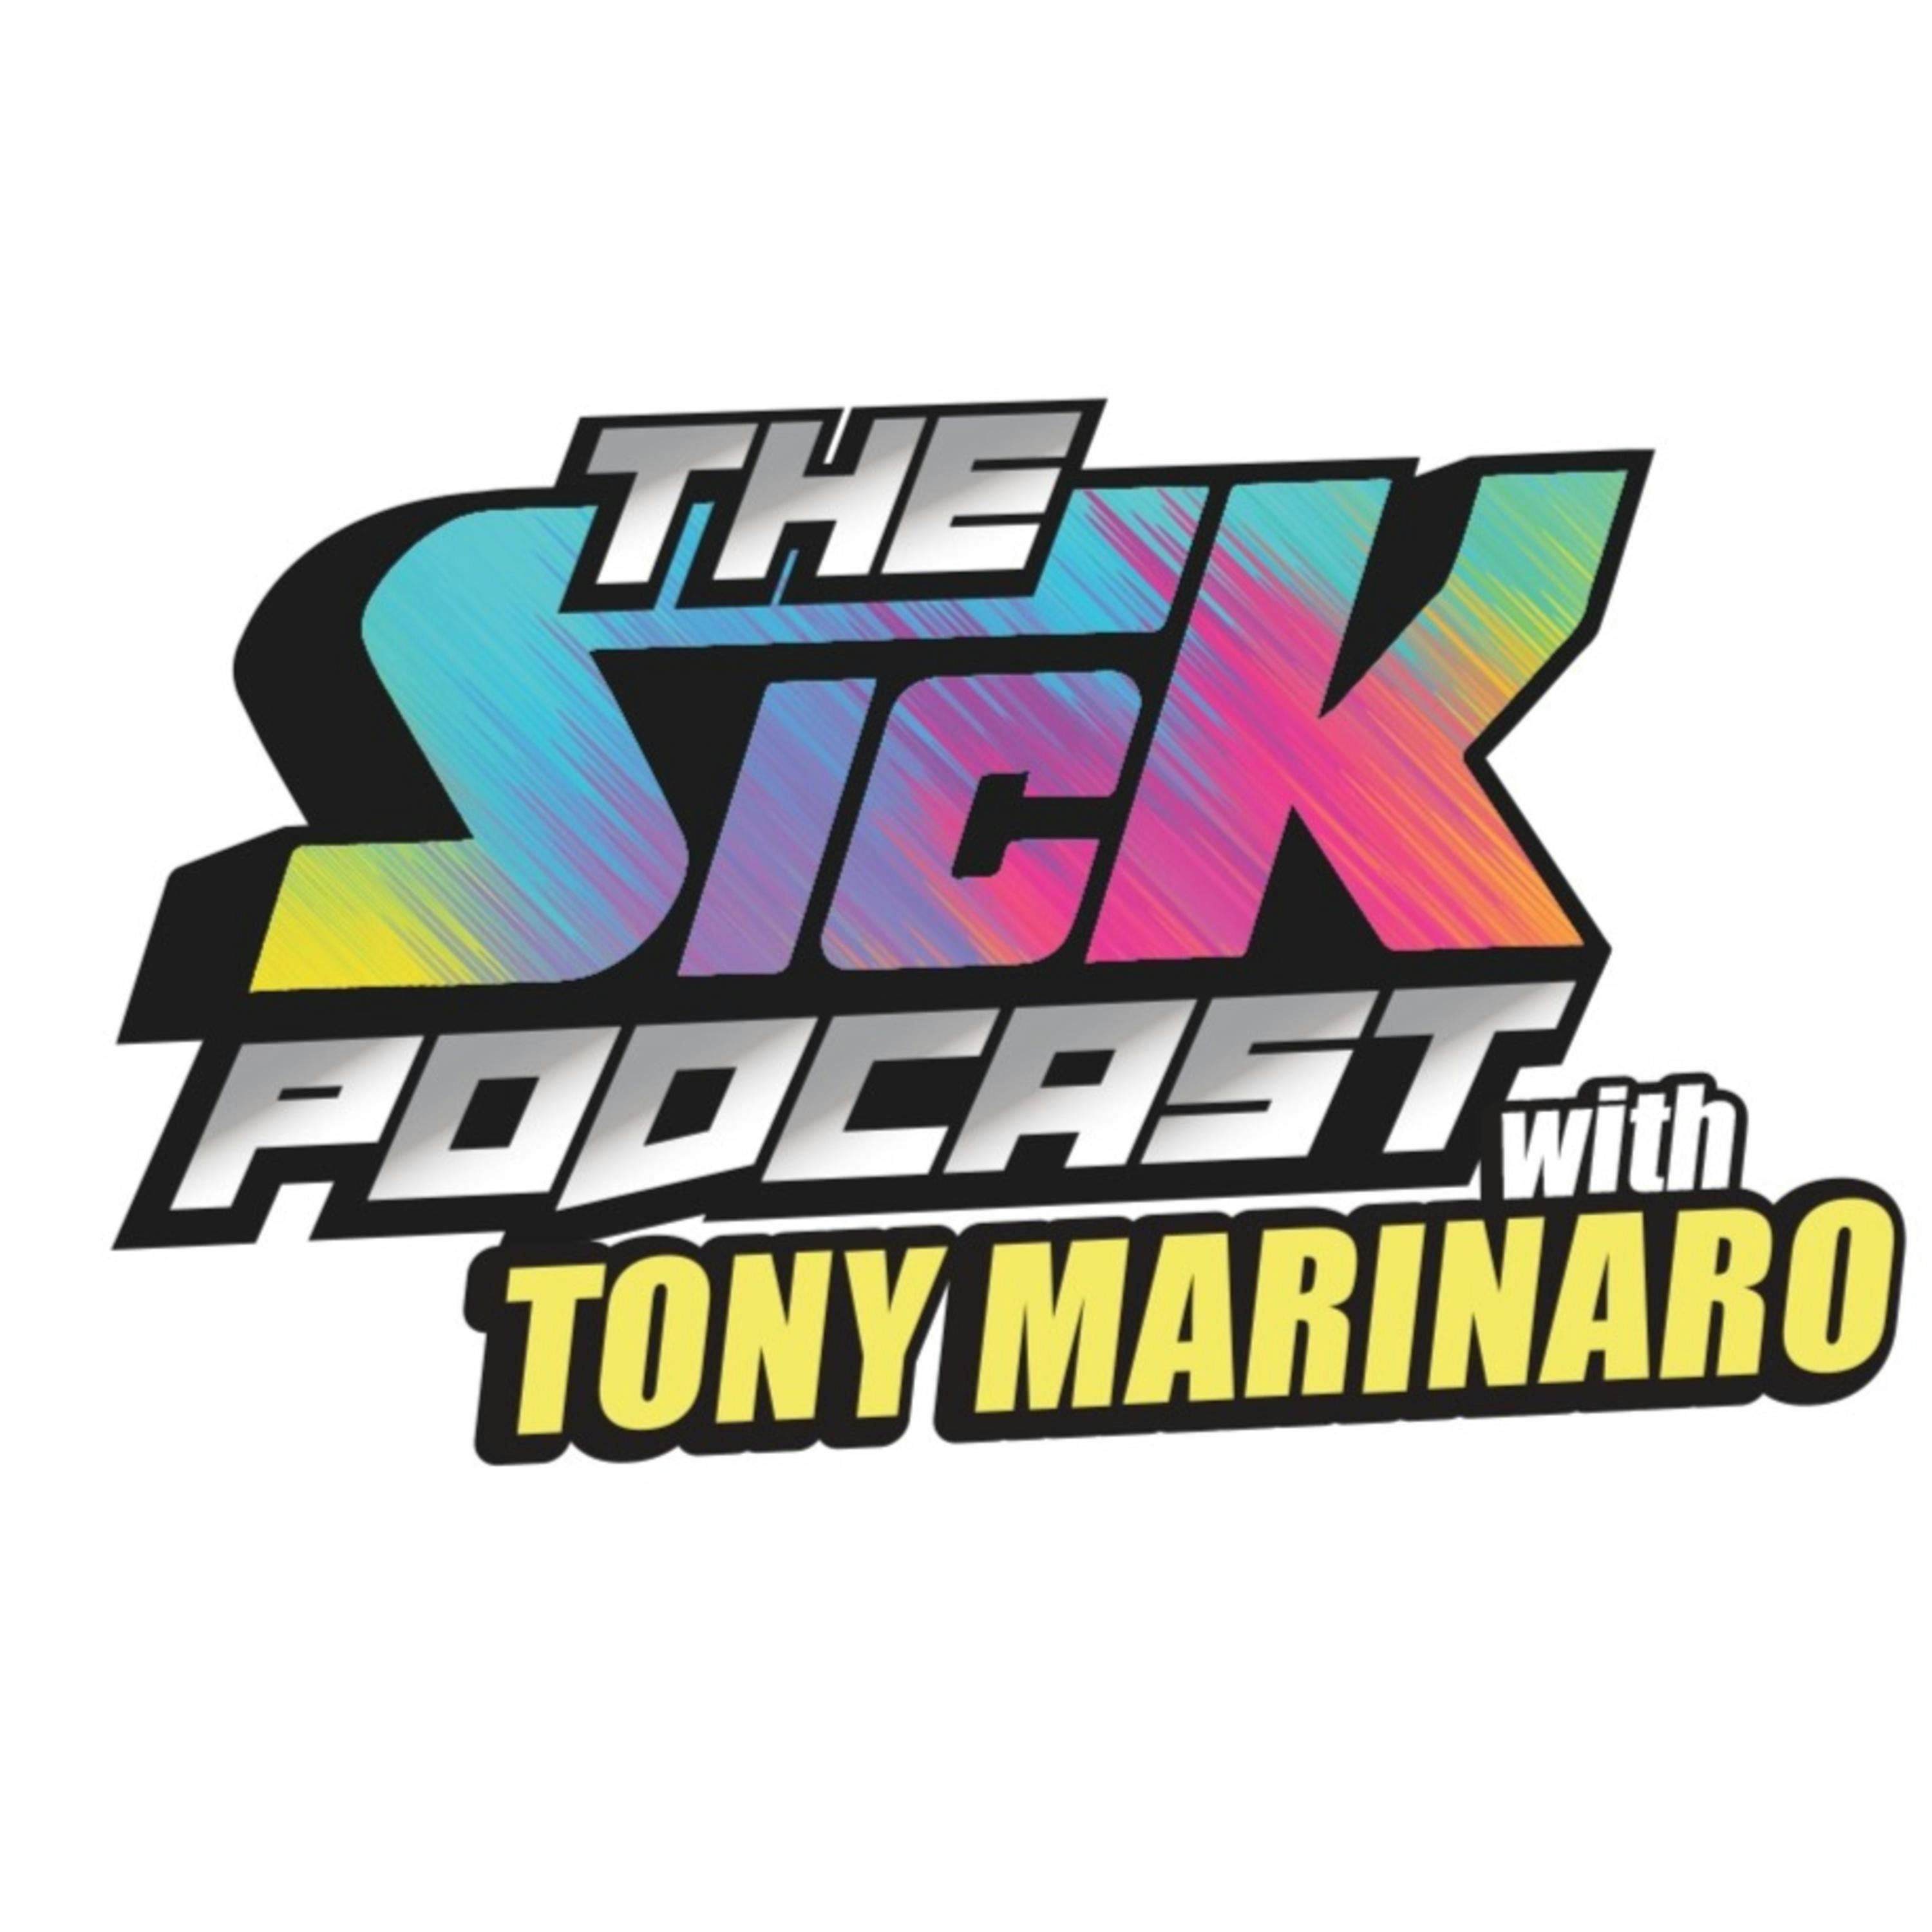 Teams Are Overpaying, Habs Need To Move! | The Sick Podcast with Tony Marinaro February 28 2023